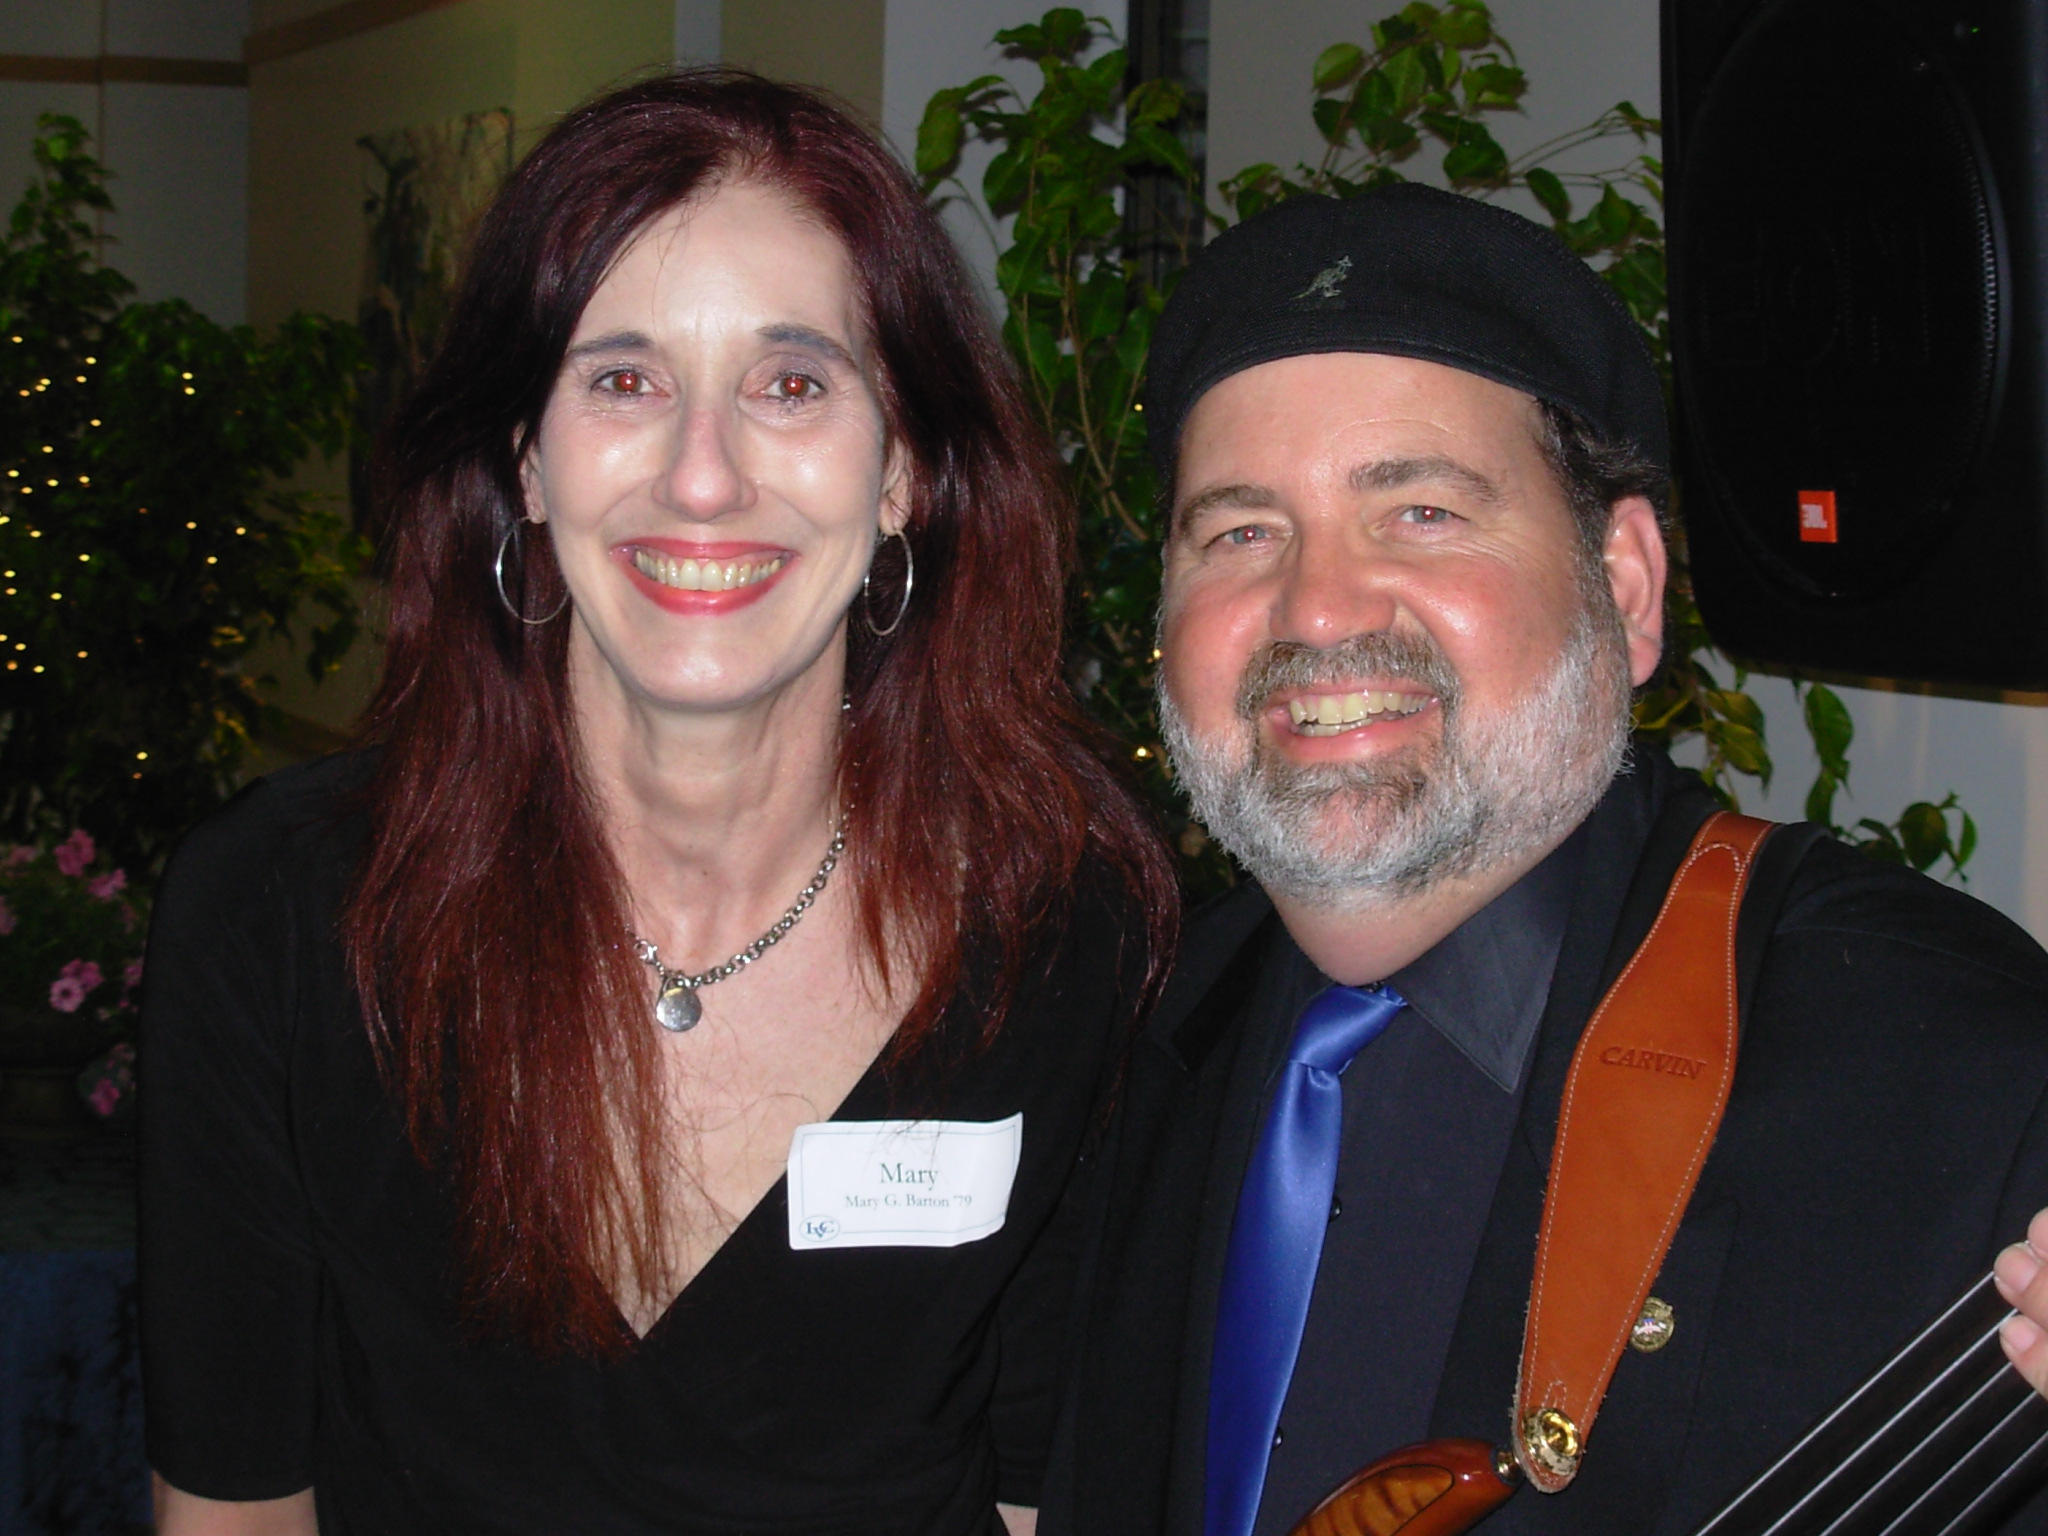 Kirk and class mate Celtic musician Mary Barton at Lebanon Valley College
